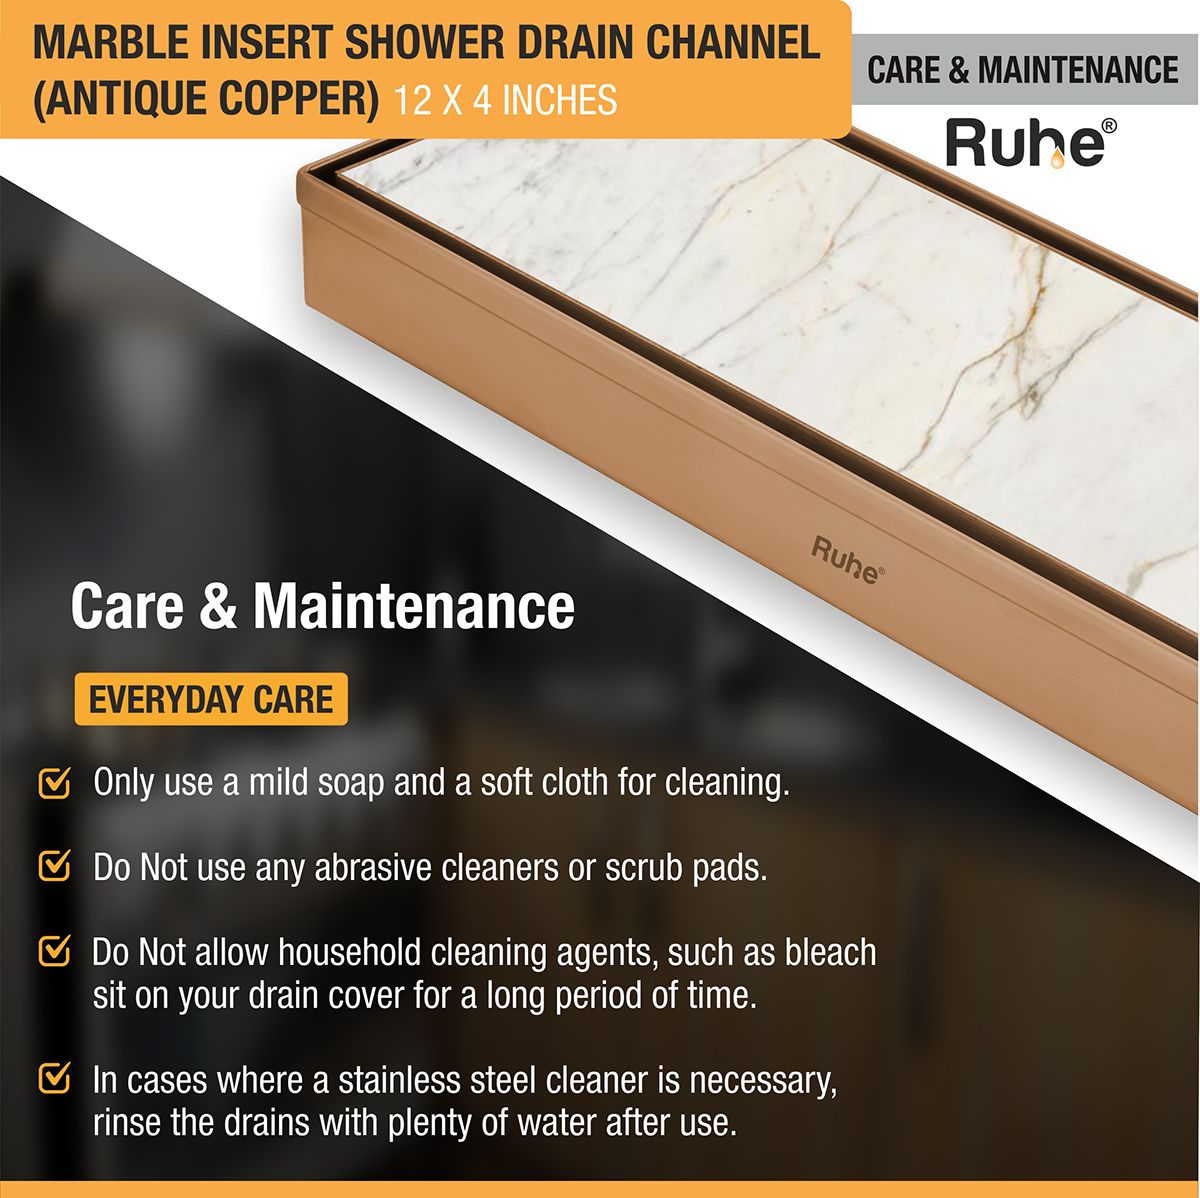 Marble Insert Shower Drain Channel (12 x 4 Inches) ROSE GOLD PVD Coated care and maintenance